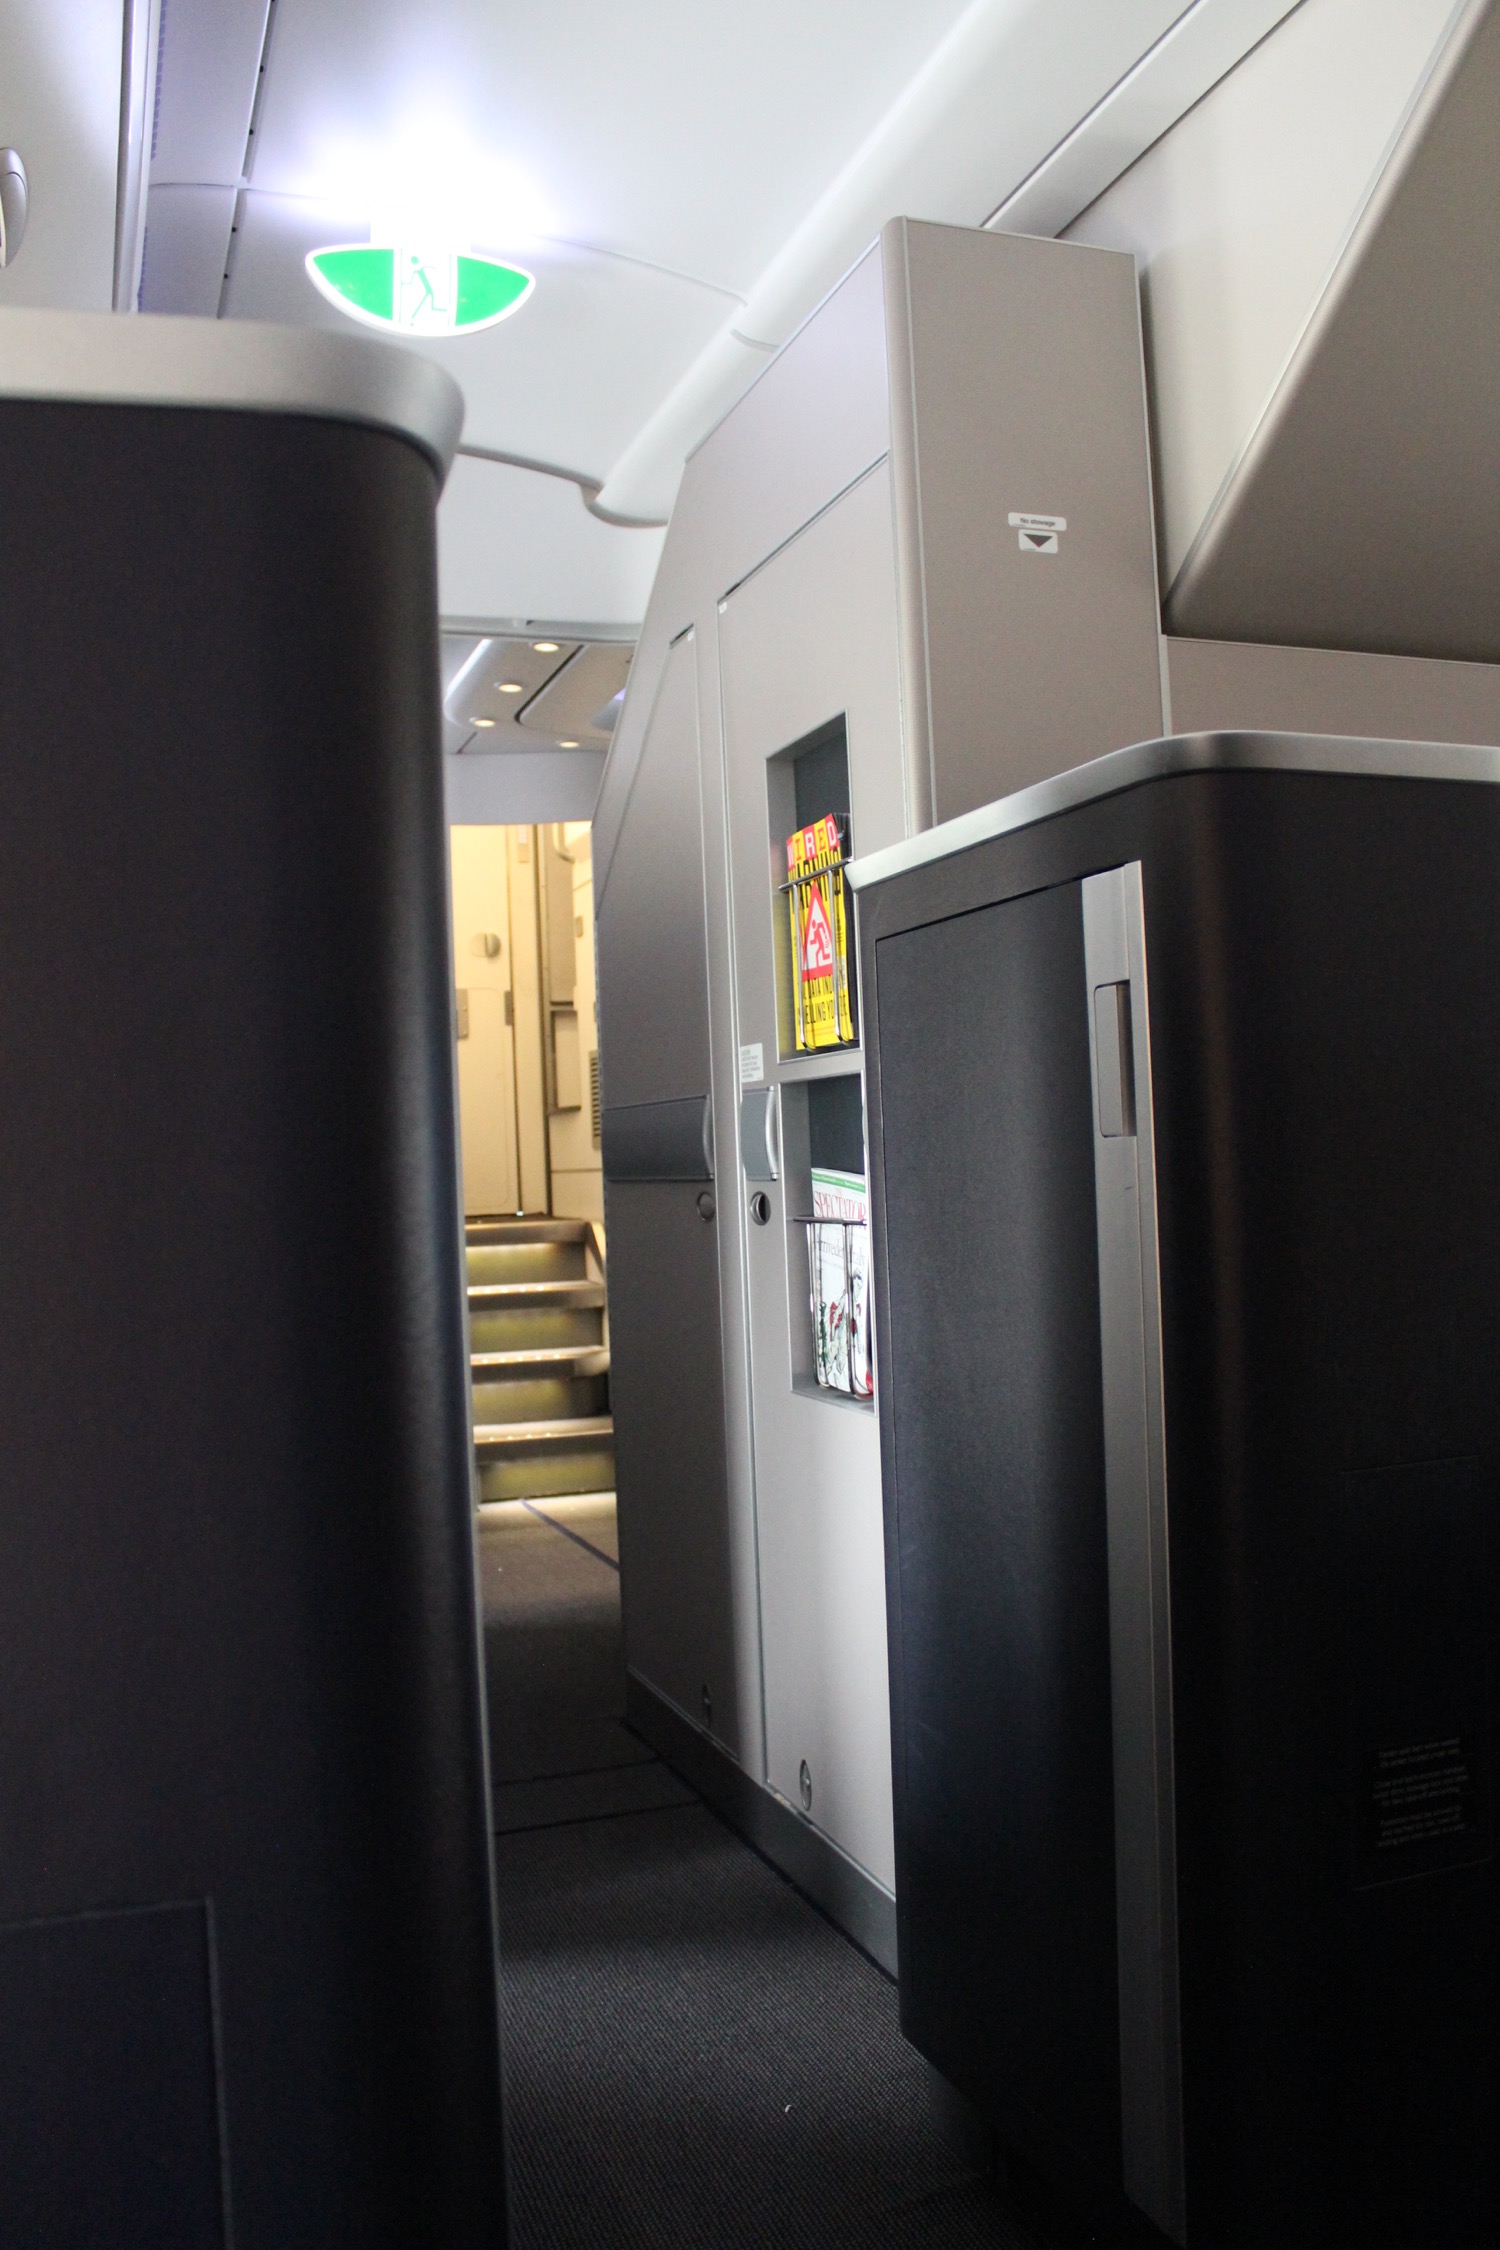 British Airways A380 First Class Review - 46